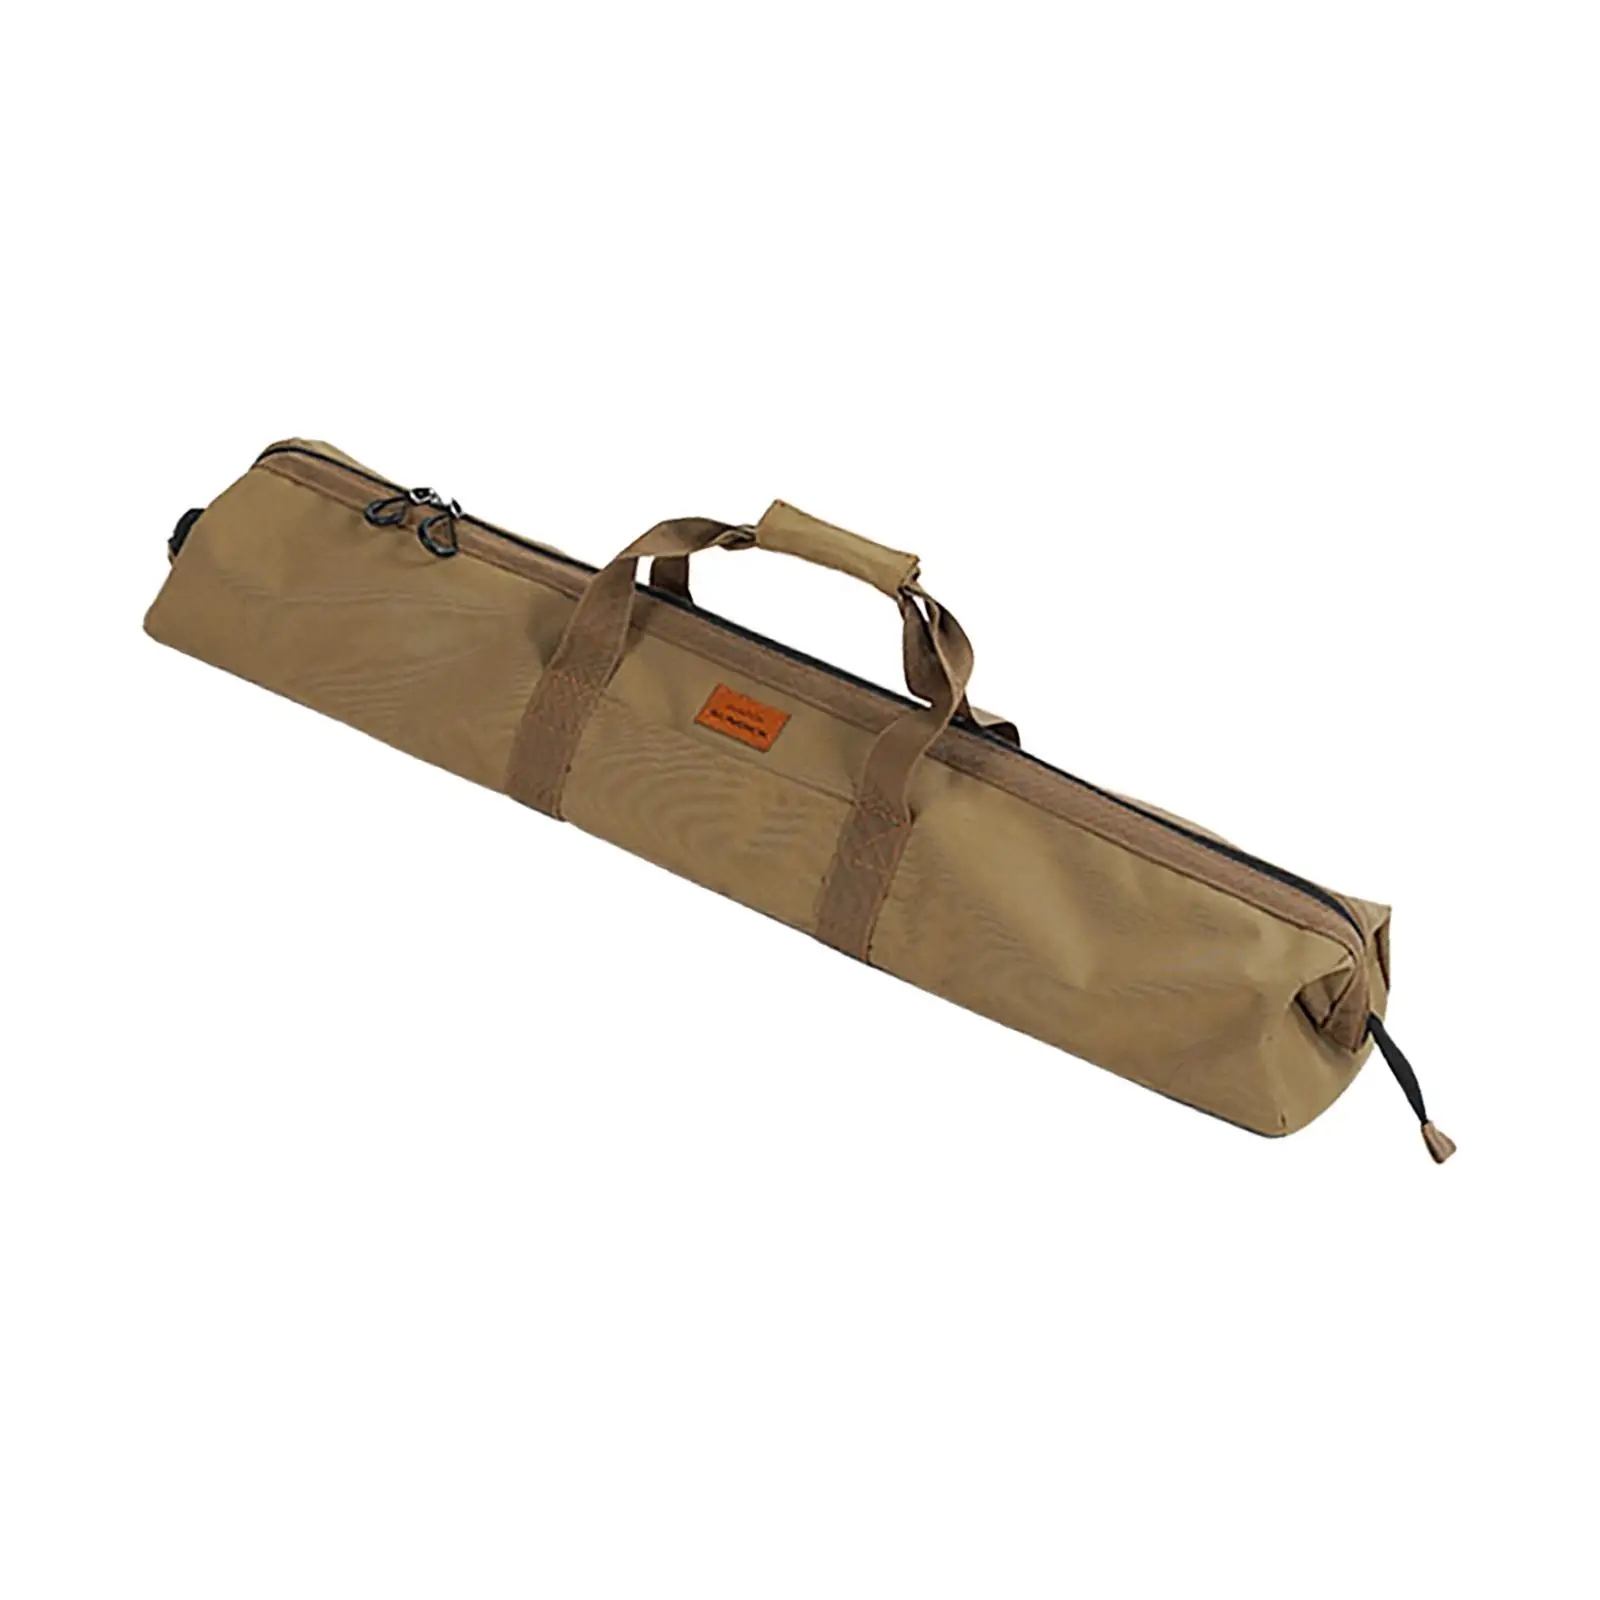 Camping Canopy Pole Storage Bag Handbag Carrying Case for Rod